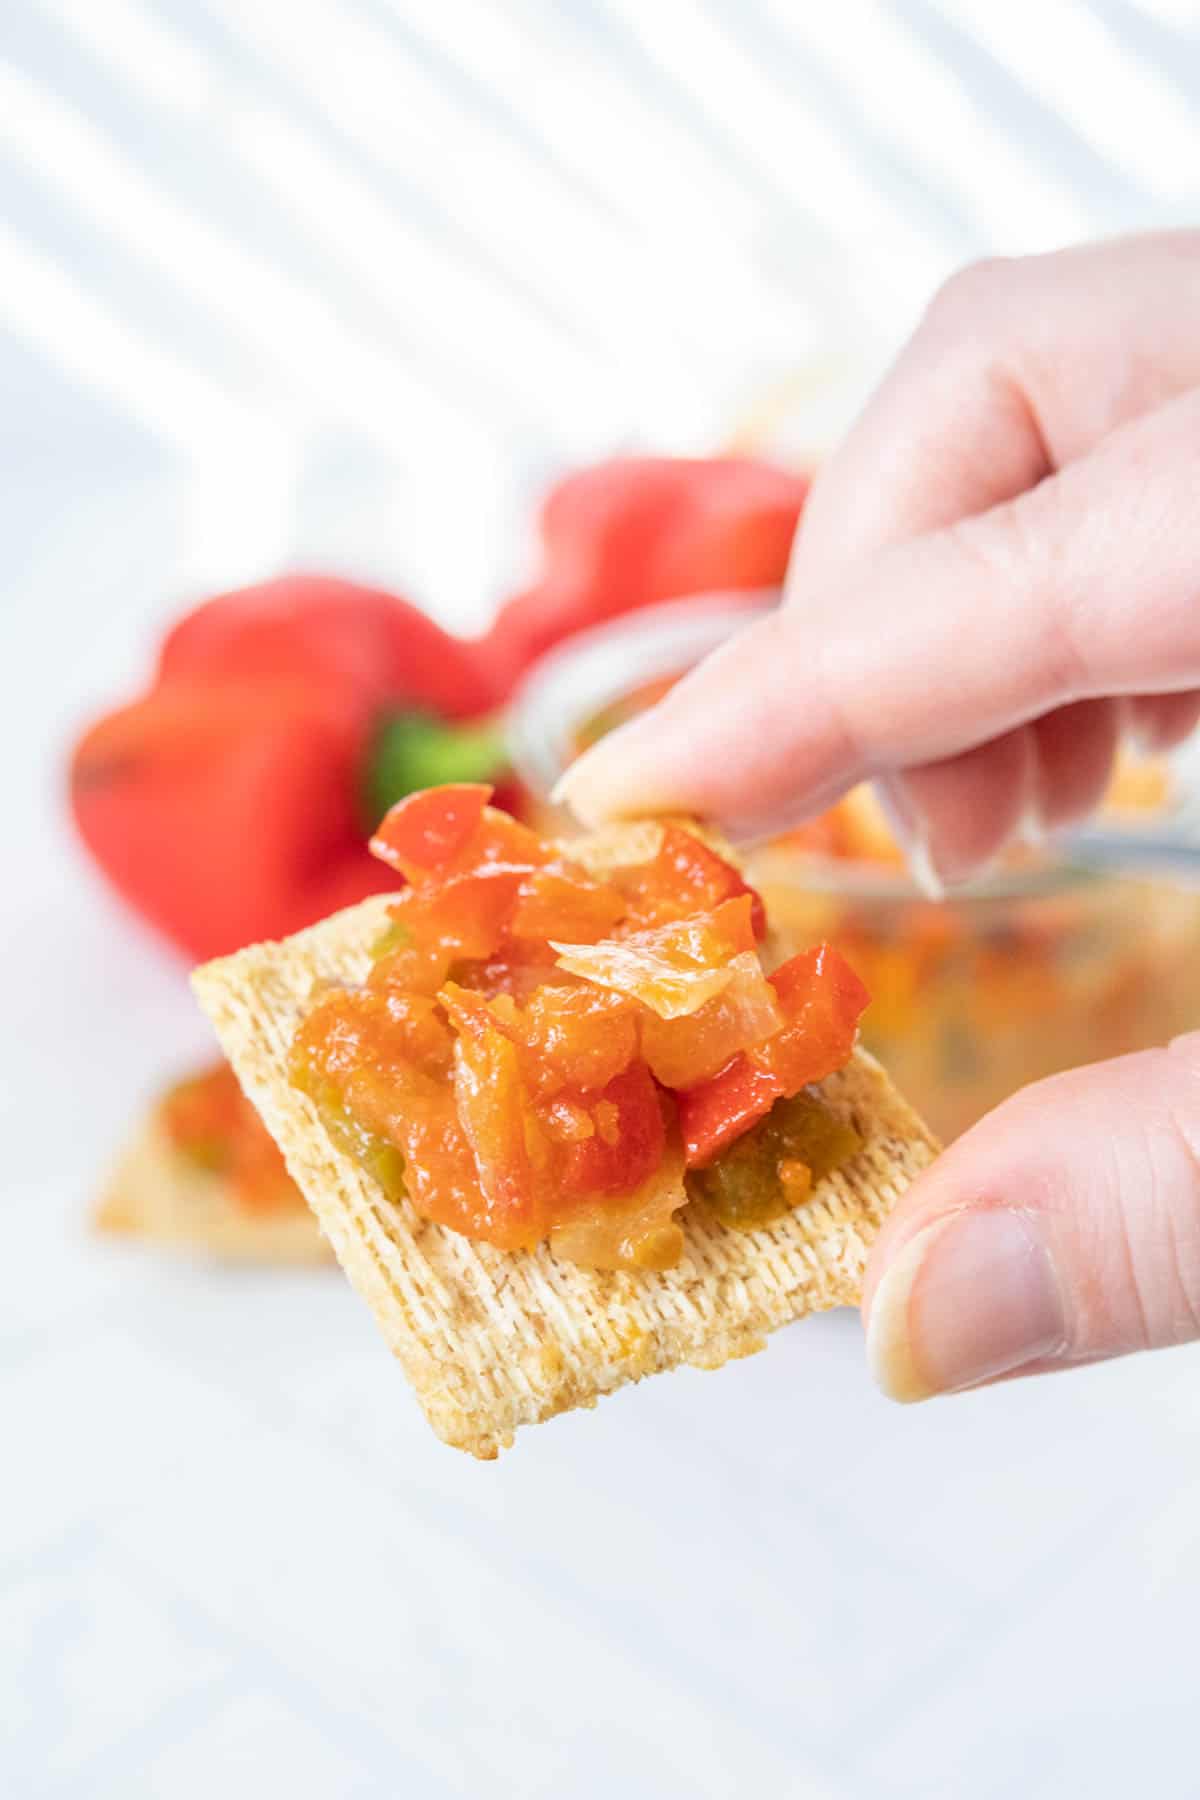 A hand is holding a cracker with pepper sauce on it.